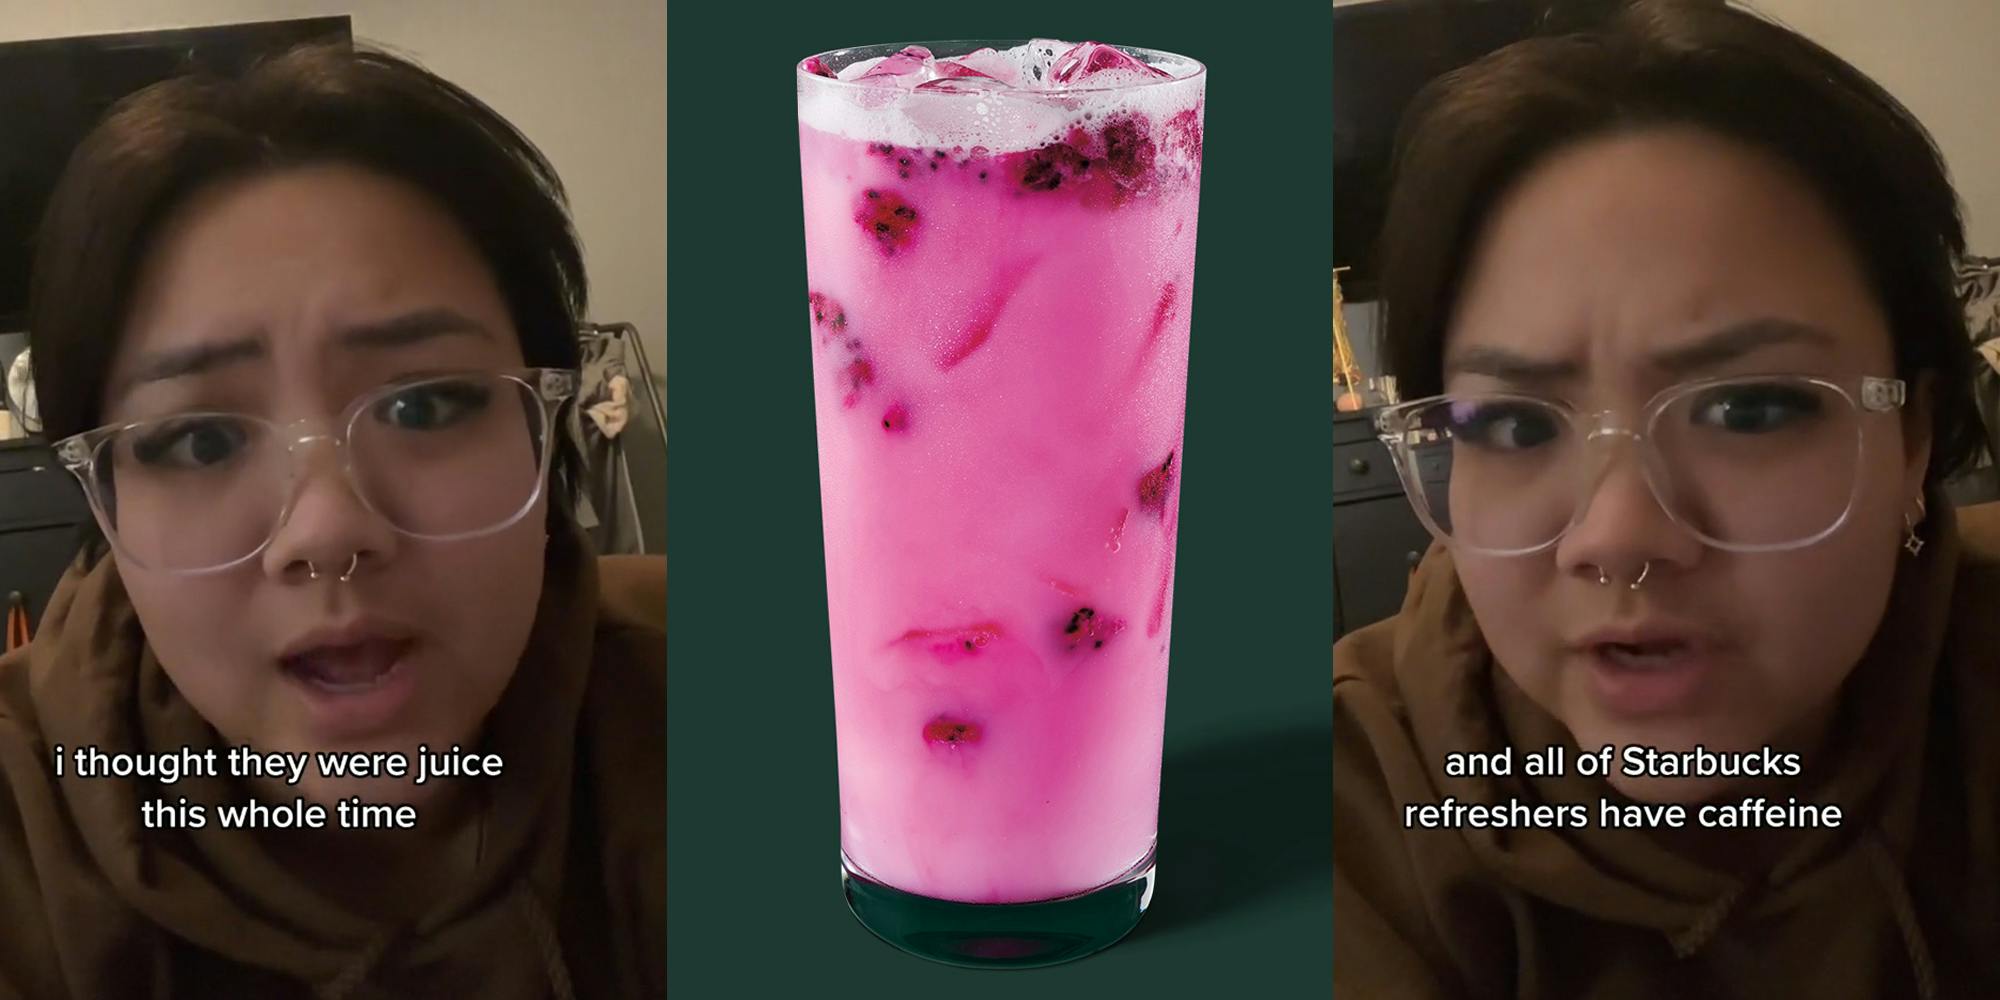 person speaking with caption "i thought they were juice this whole time" (l) Starbucks Dragon Drink Refresher on green background (c) person speaking with caption "and all of Starbucks refreshers have caffeine" (r)